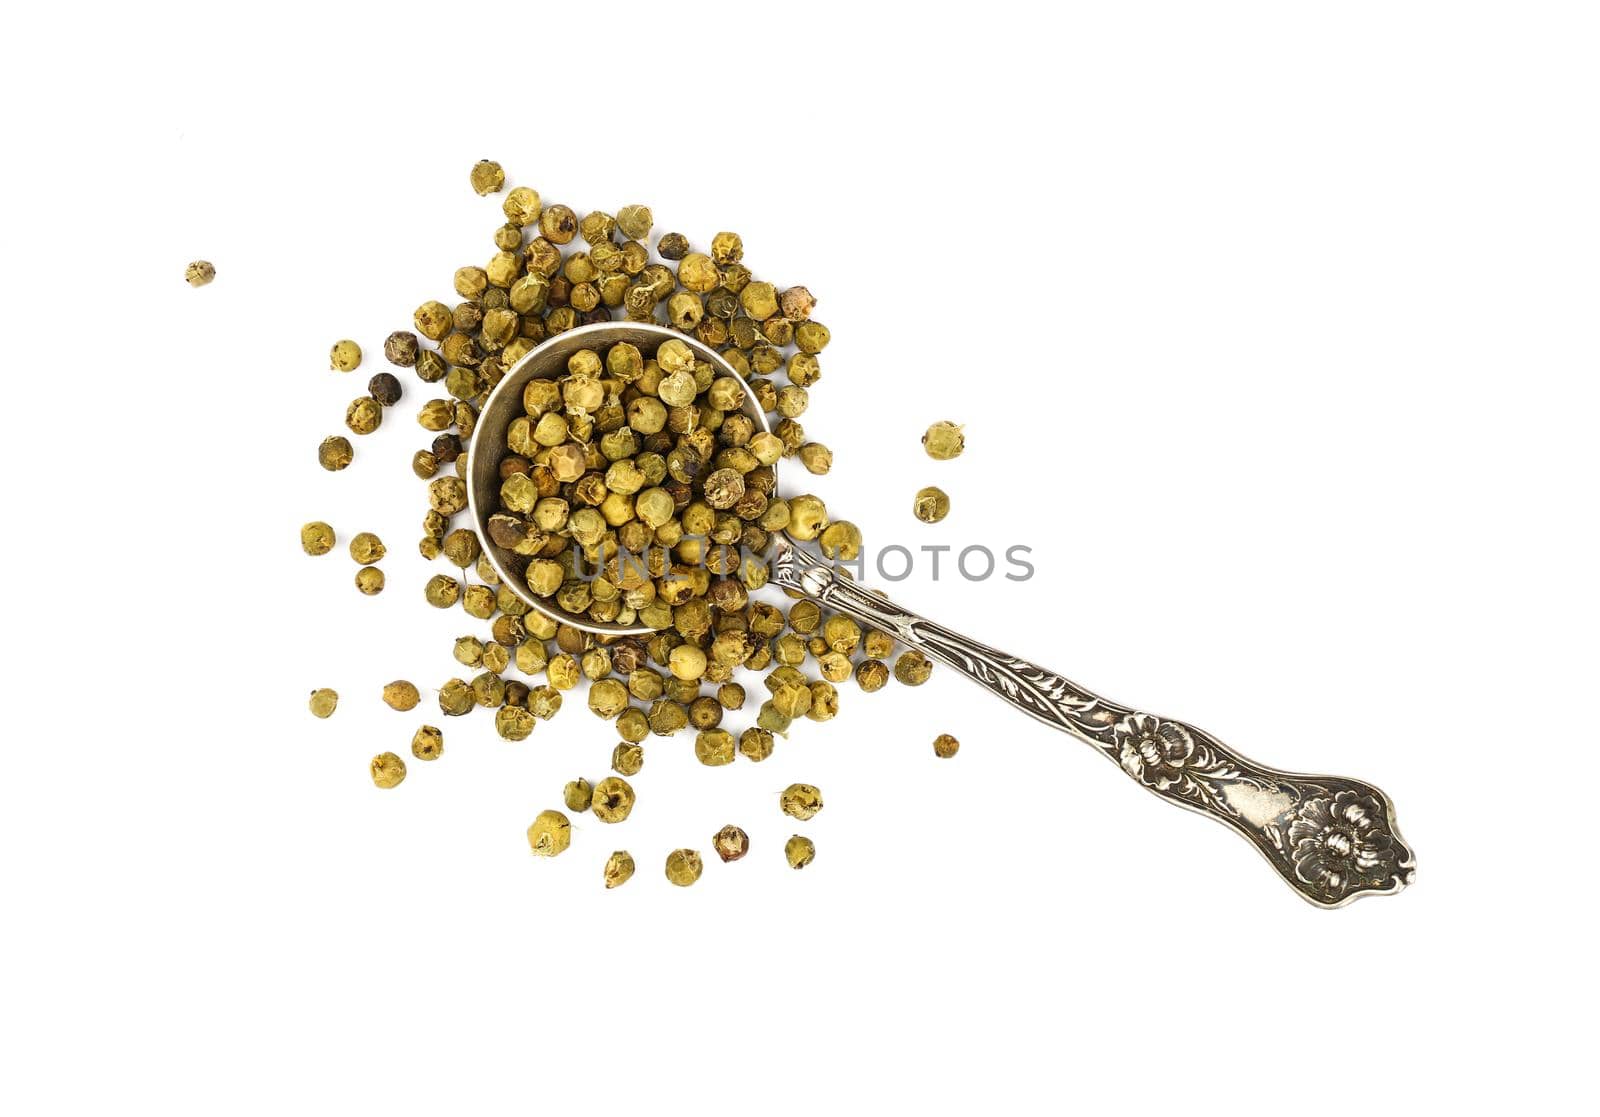 Close up one vintage metal spoon full of green pepper peppercorns and heap of peppercorns spilled and spread around isolated on white background, elevated top view, directly above